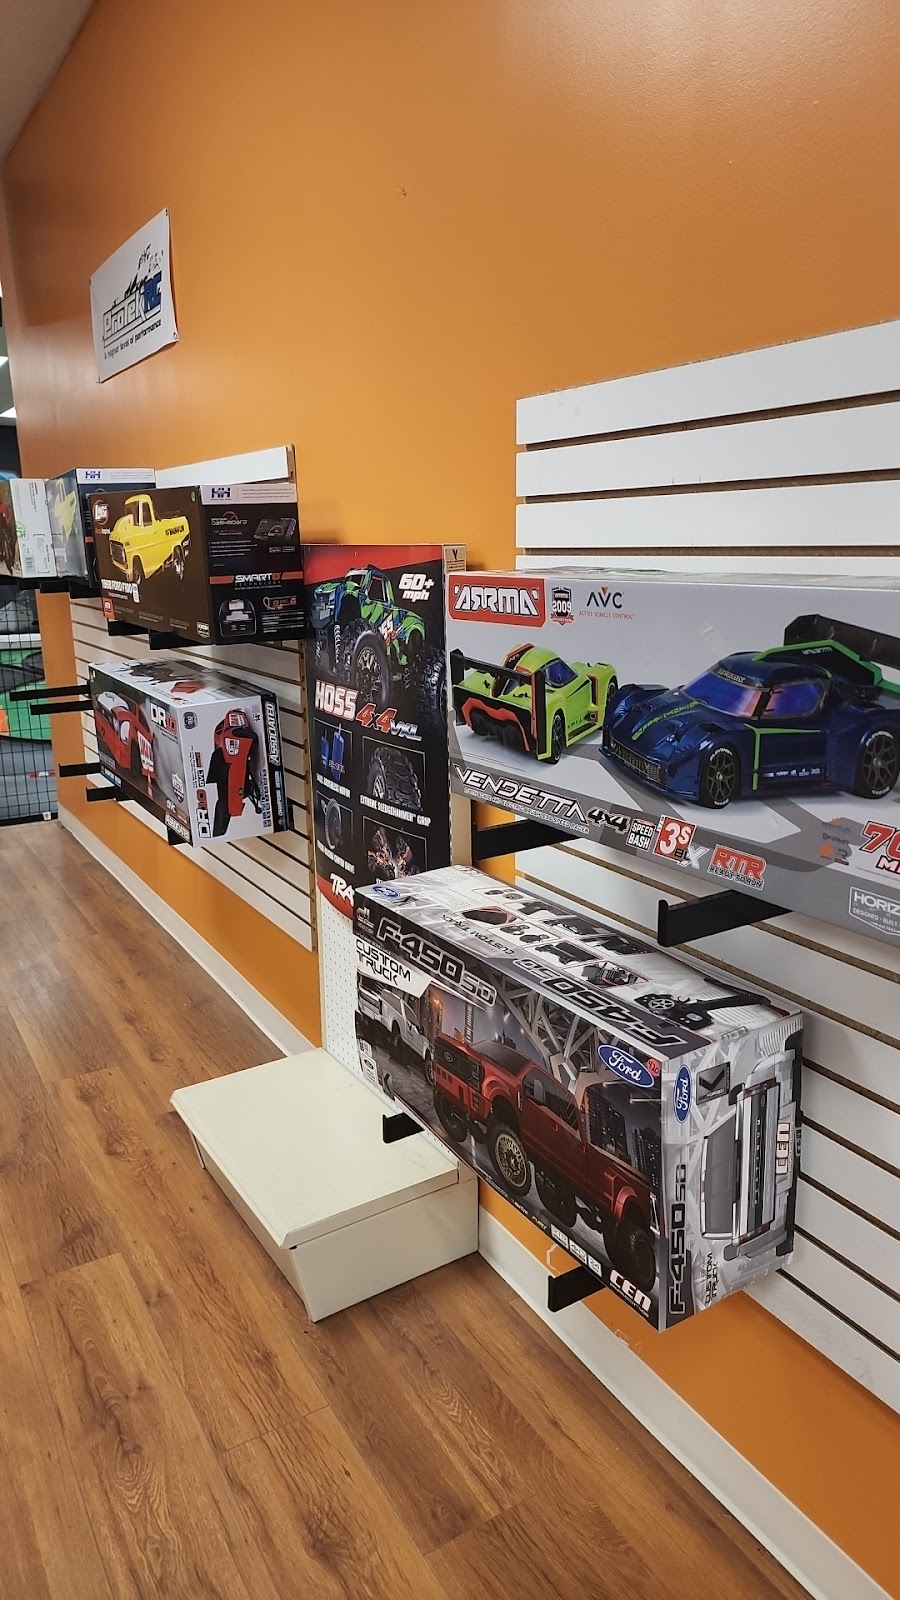 Tiny Adventures Rc | 451 S Oxford Valley Rd, Fairless Hills, PA 19030, USA | Phone: (215) 736-1290